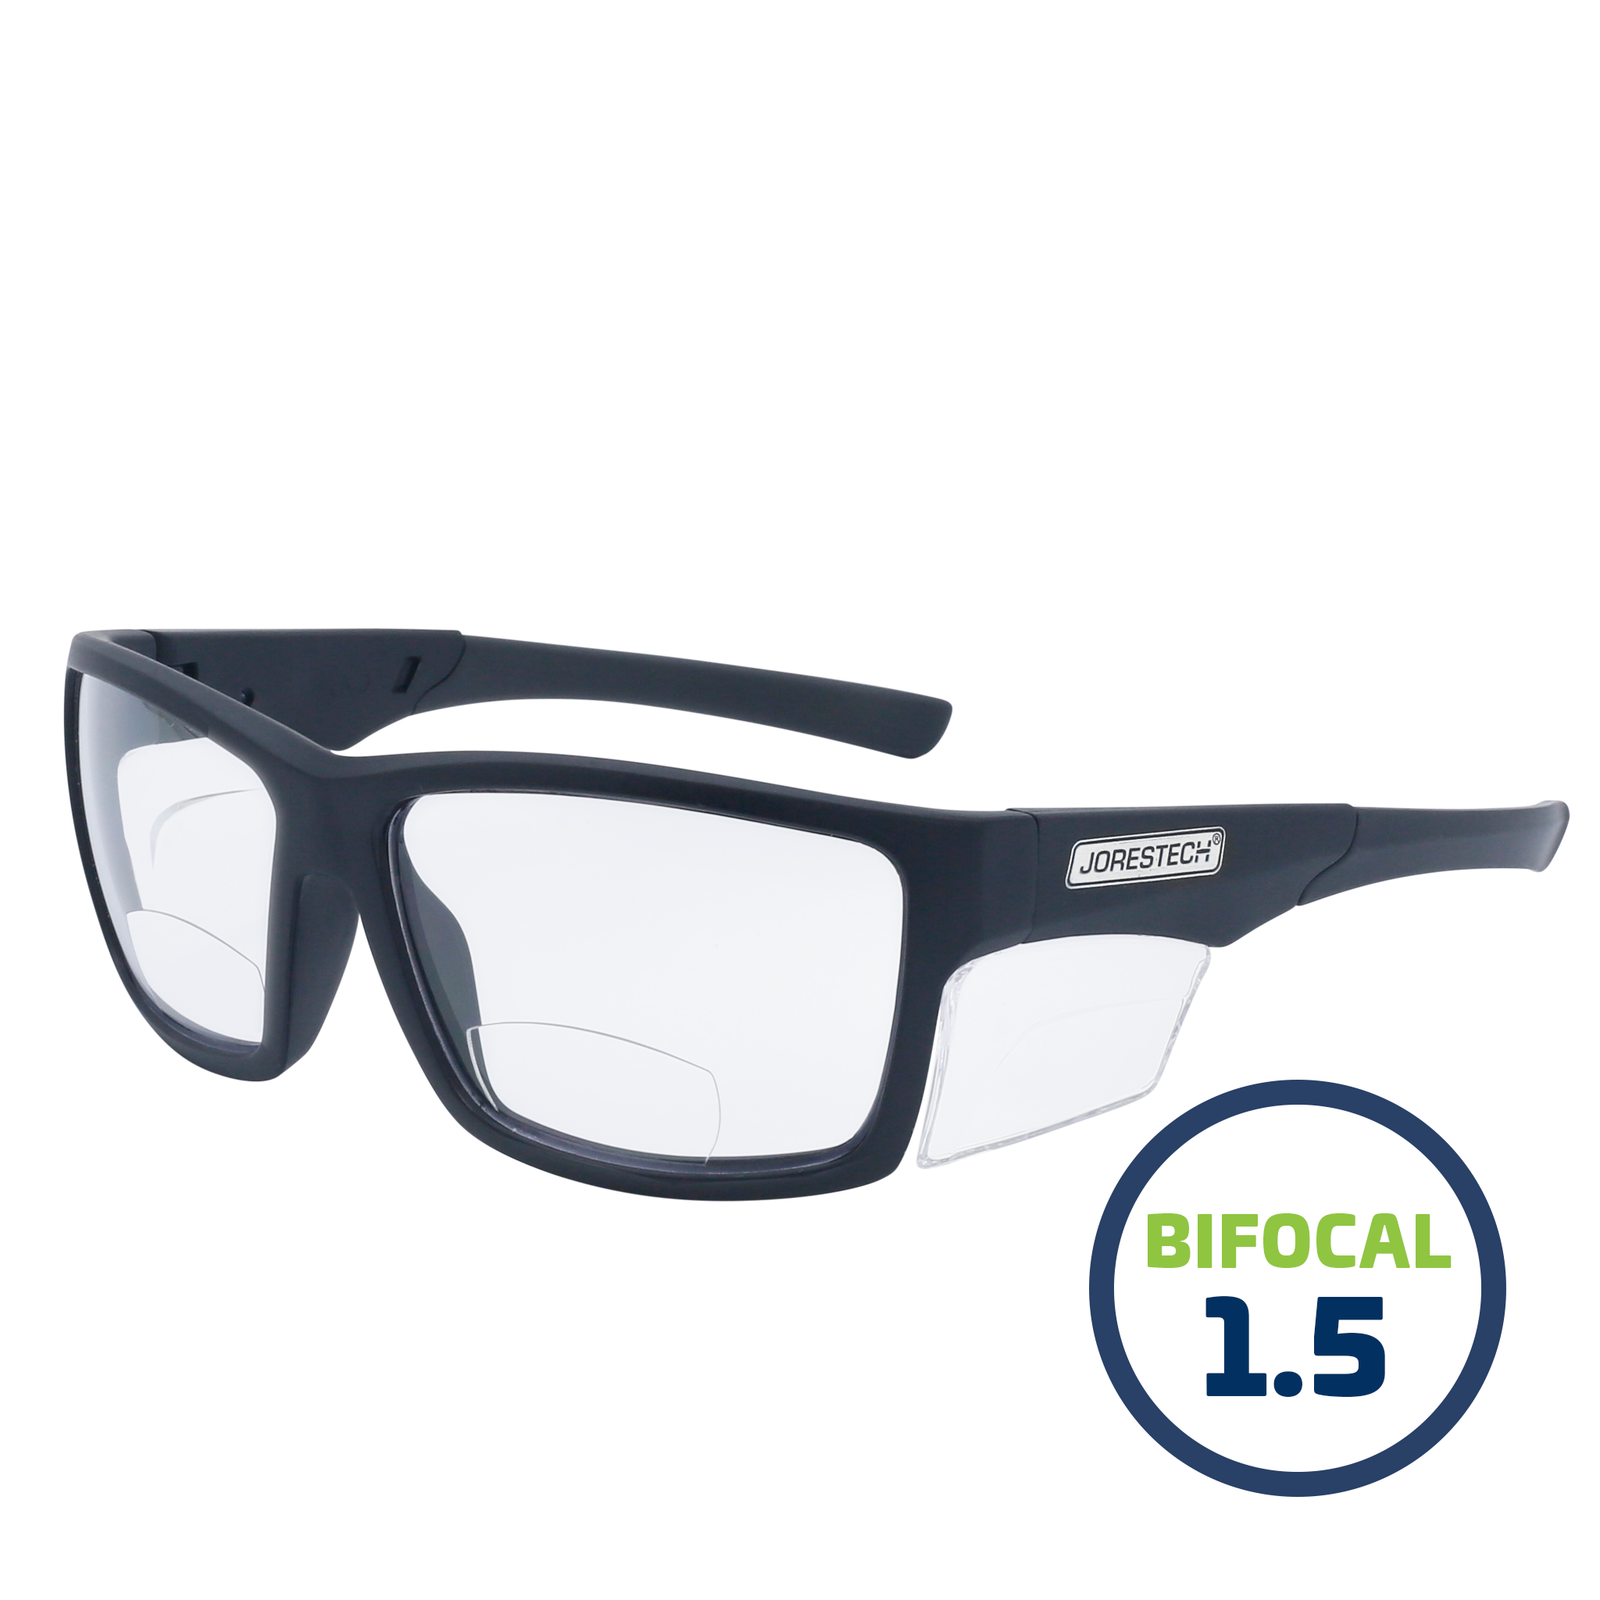 A JORESTECH bifocal safety reader Glasses with clear side shield for high impact protection. These safety glasses have black frame and clear polycarbonate lenses. In a green and blue drawing it reads bifocal 1.5